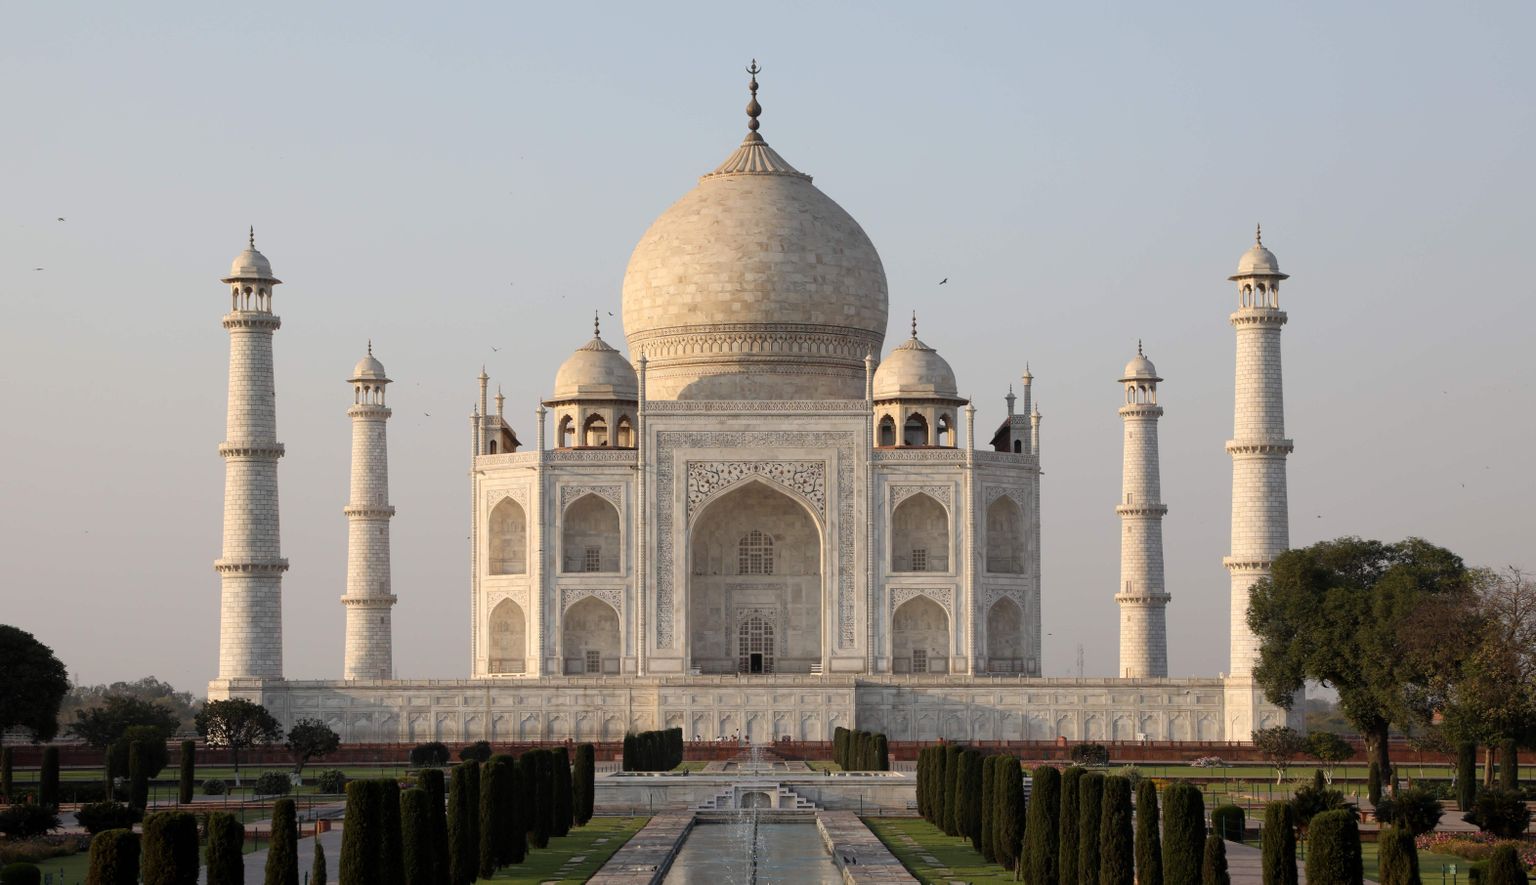 (FILES) In this file photo taken on March 11, 2018 The Taj Mahal mausoleum is pictured in the Indian city of Agra.
Cultural activists on April 29 accused the Indian government of privatising historic relics such as the Taj Mahal after it launched a controversial scheme allowing companies to "adopt" dozens of monuments.  

 / AFP PHOTO / Ludovic MARIN